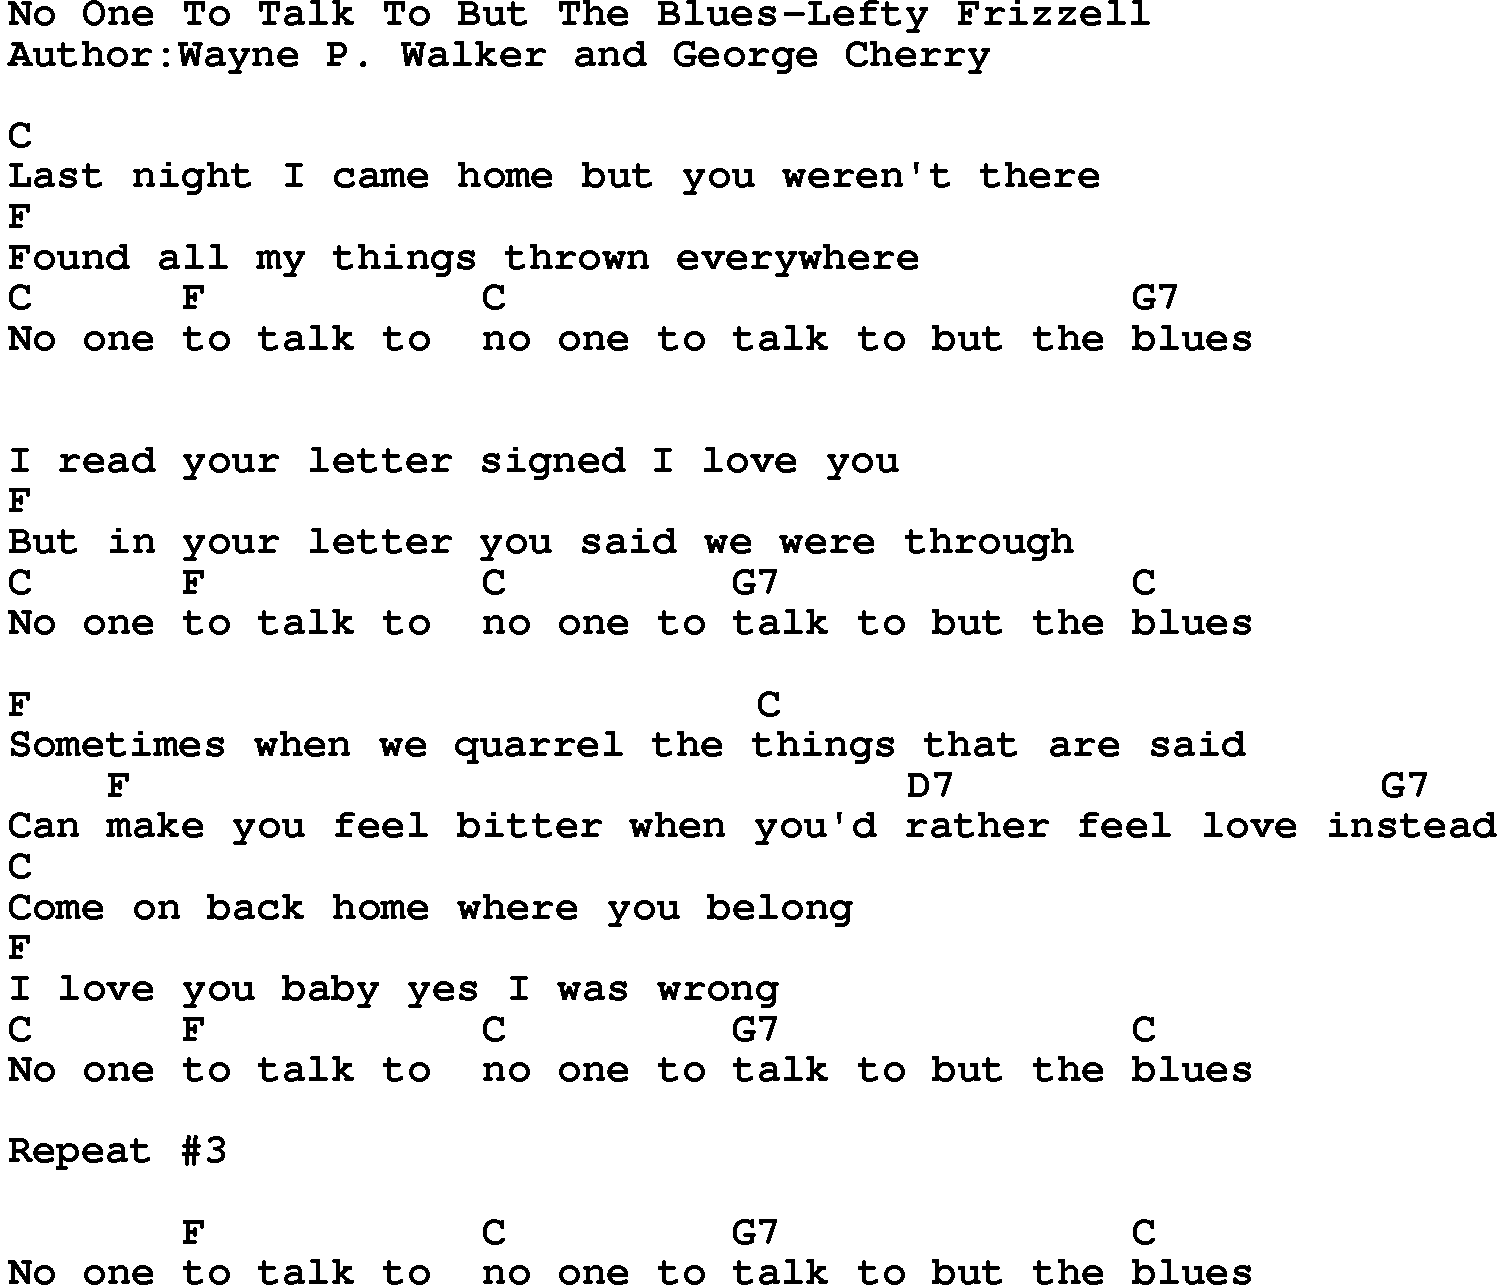 Country music song: No One To Talk To But The Blues-Lefty Frizzell lyrics and chords